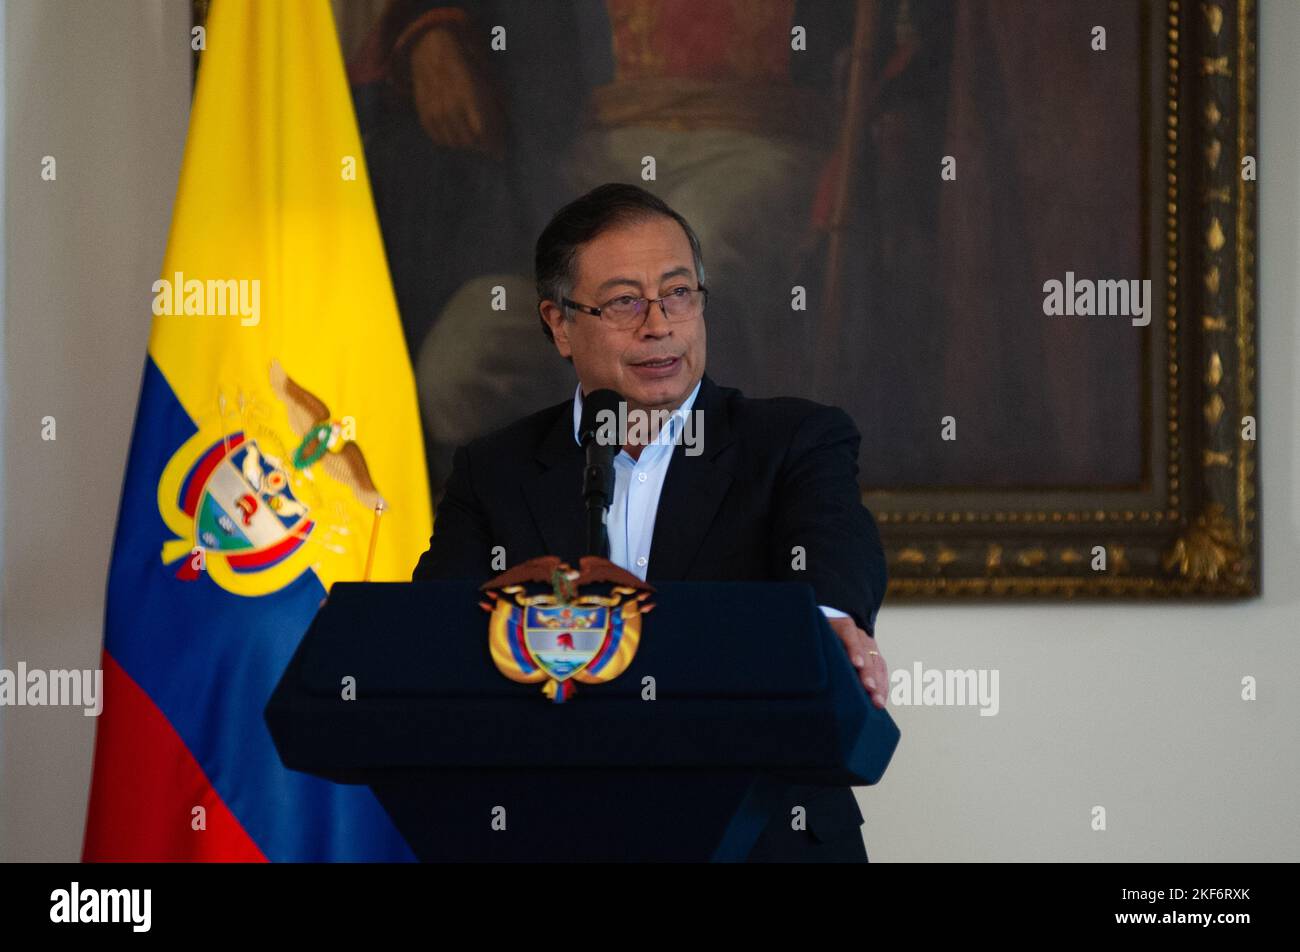 Colombian president Gustavo Petro speaks during a press conference about the first 100 days of his government in office, in Bogota, Colombia on Novemb Stock Photo